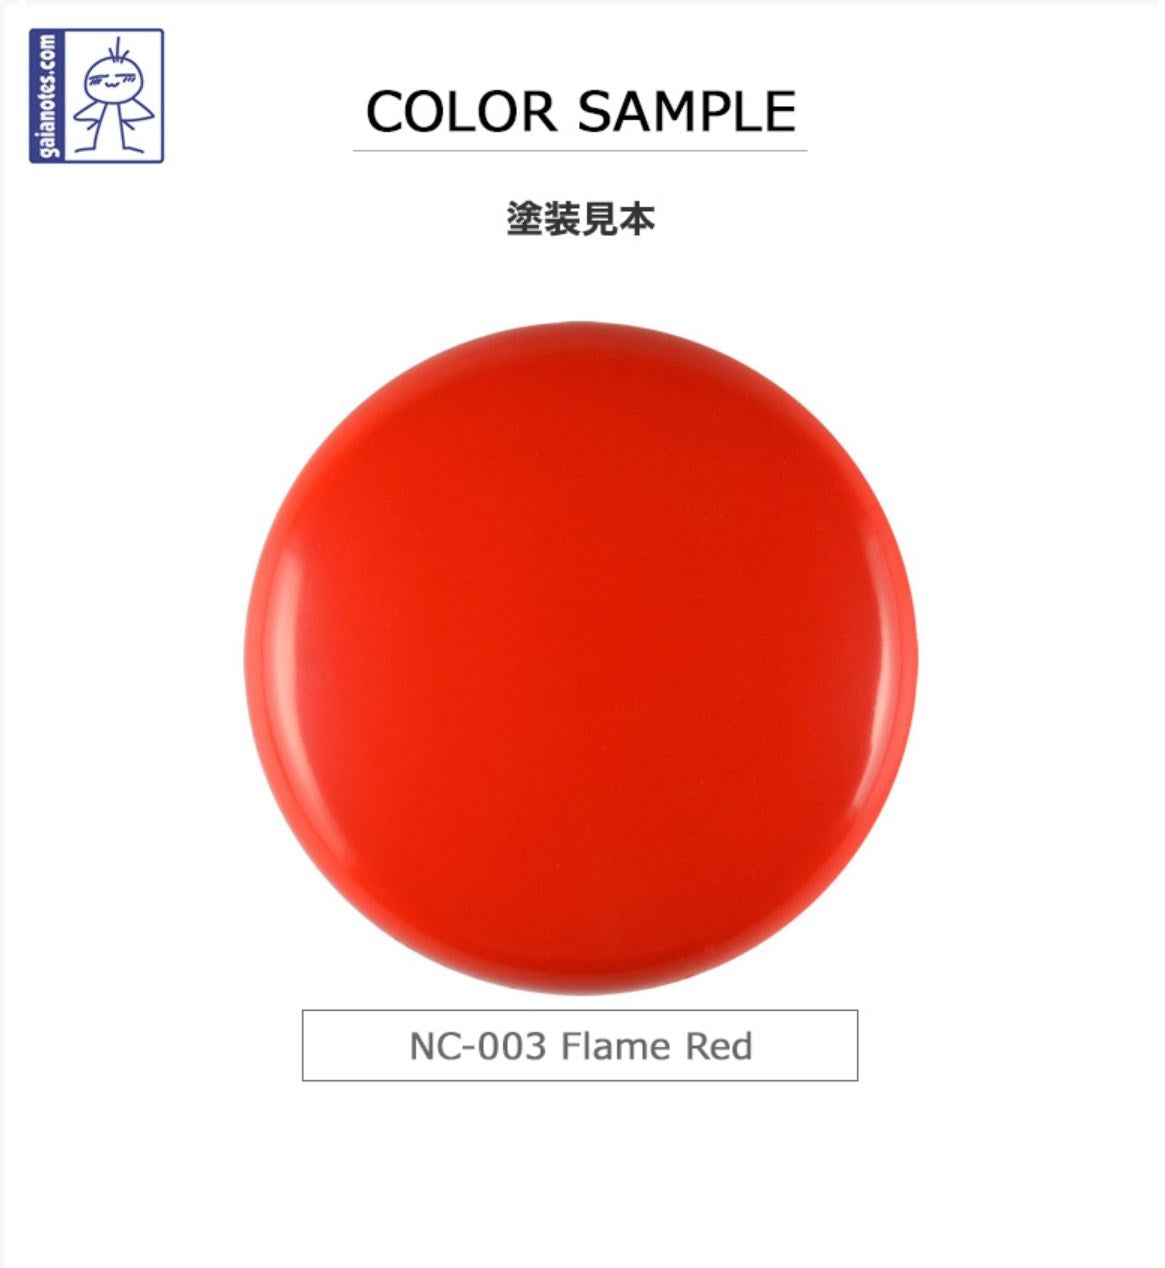 Gaianotes NC-003 Flame Red